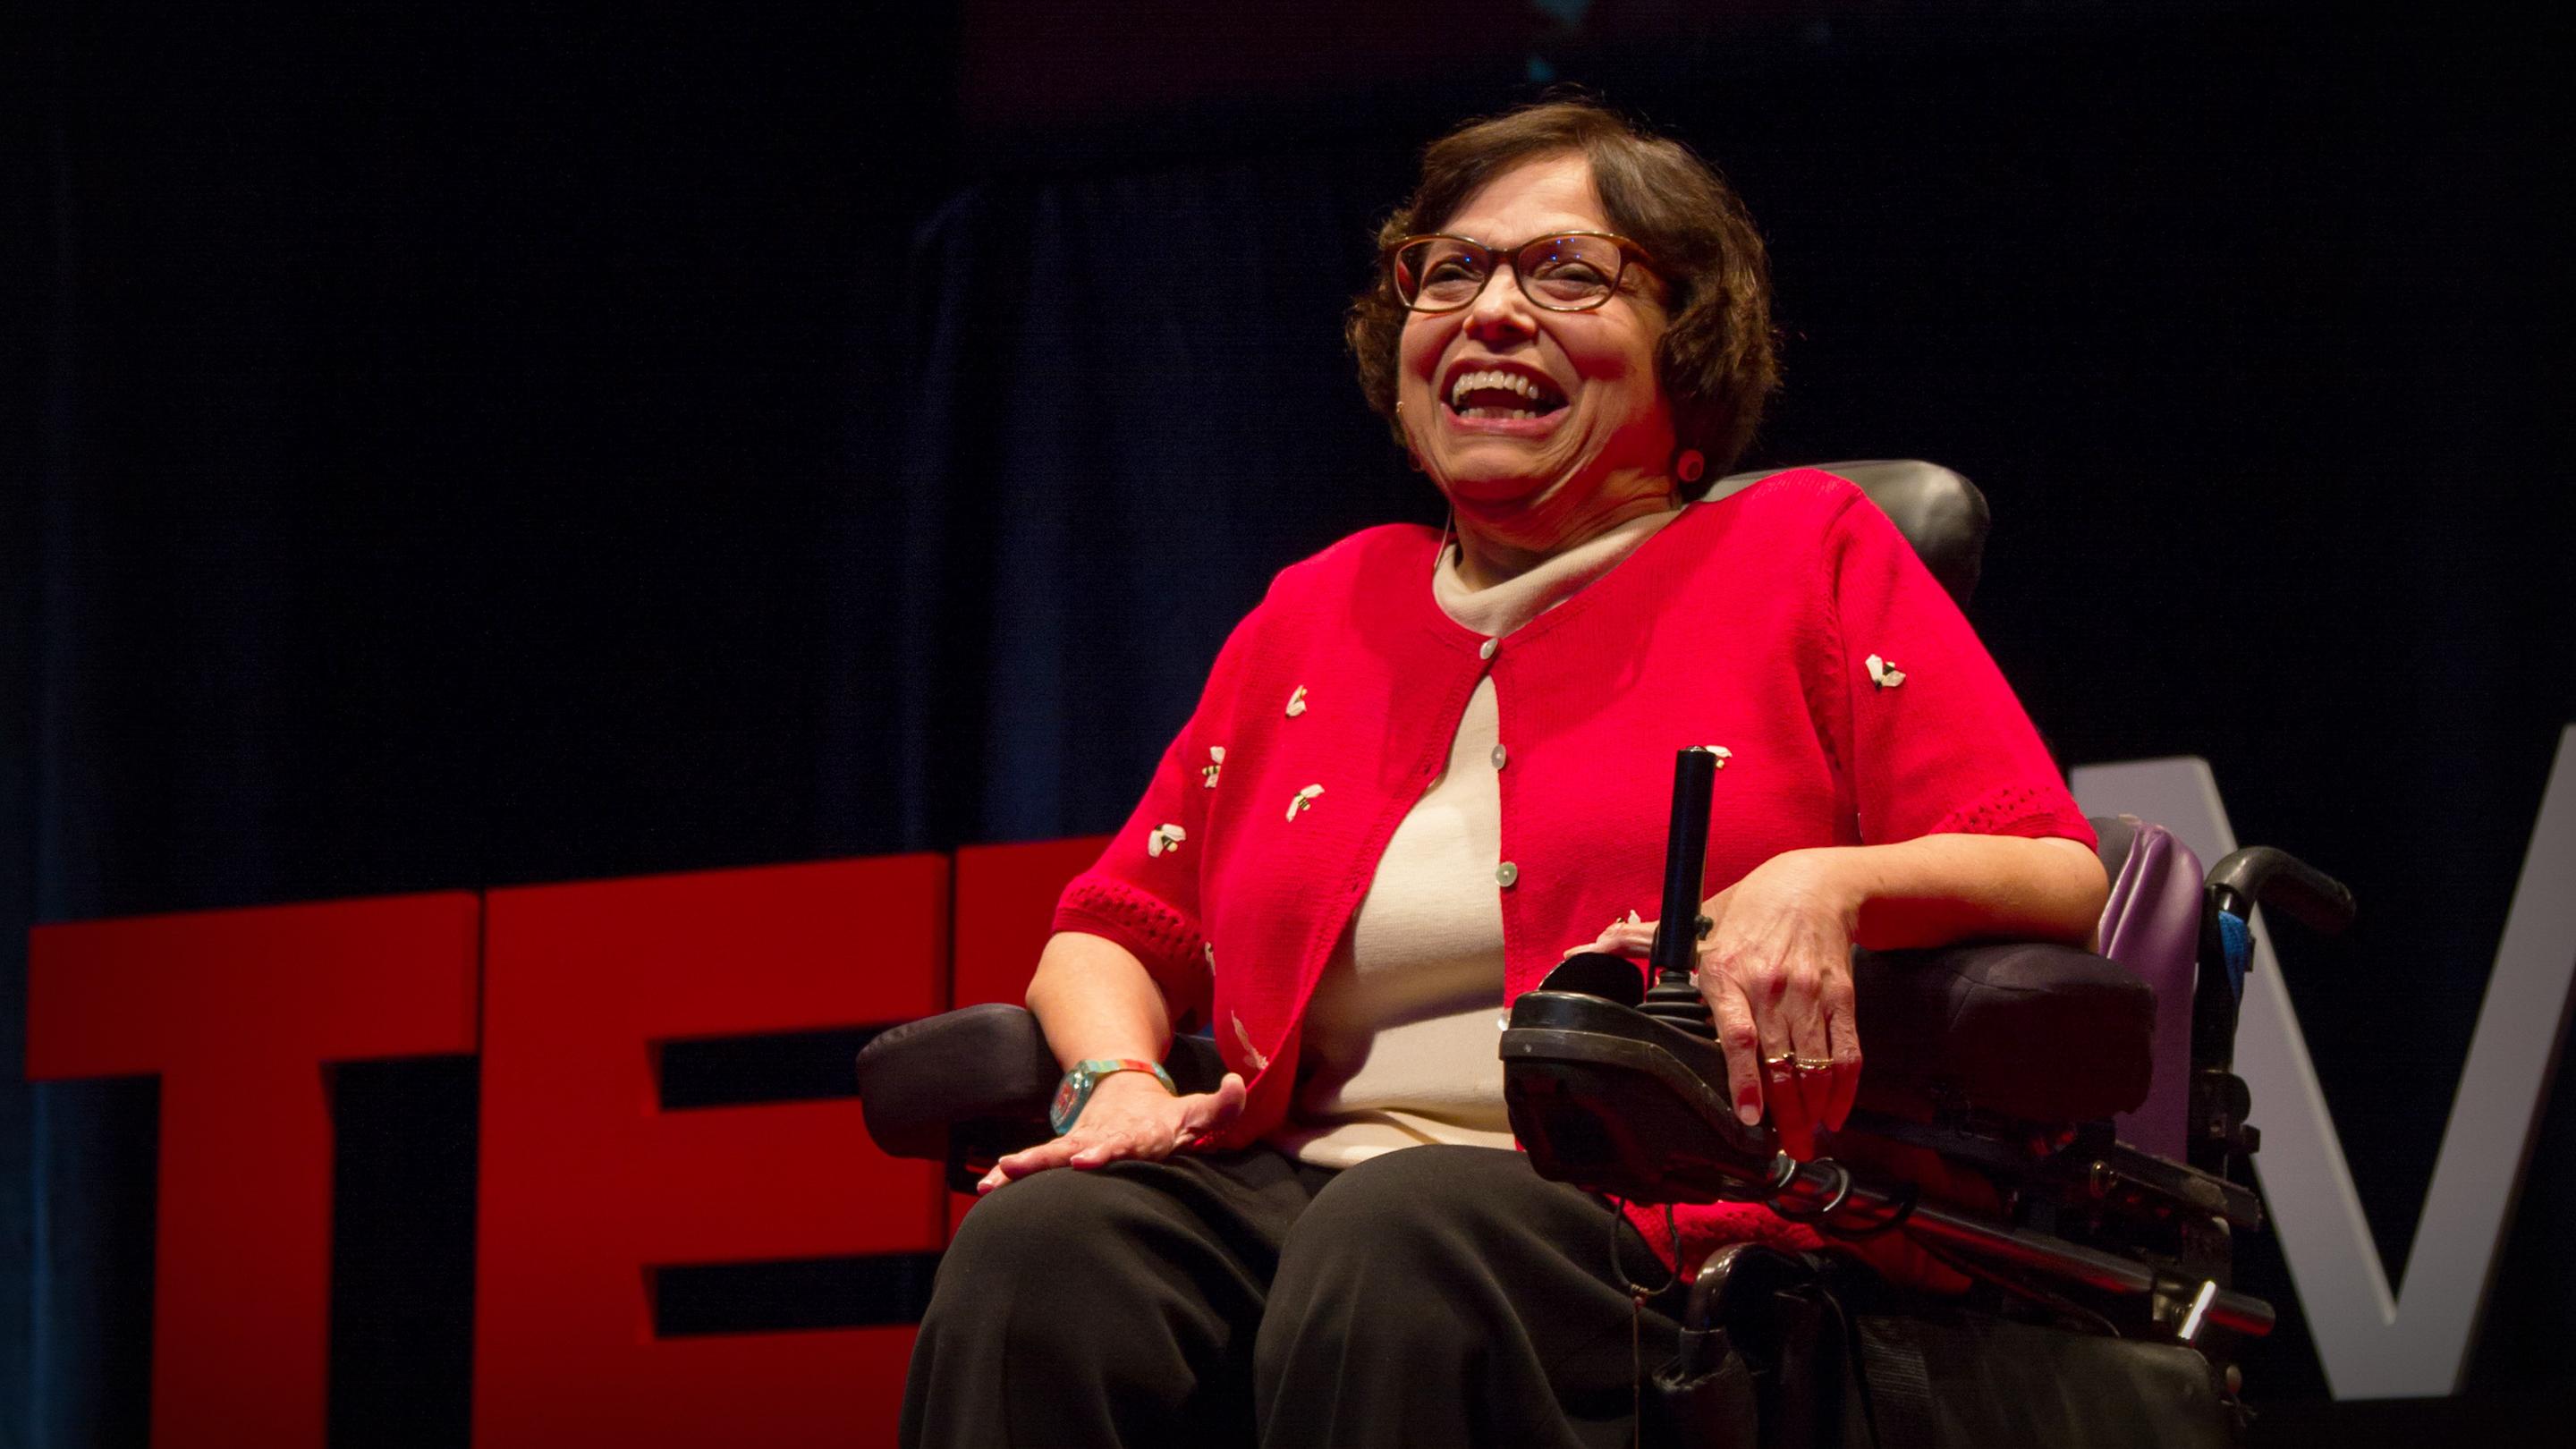 Video still of Judith Heumann on the TEDx stage smiling